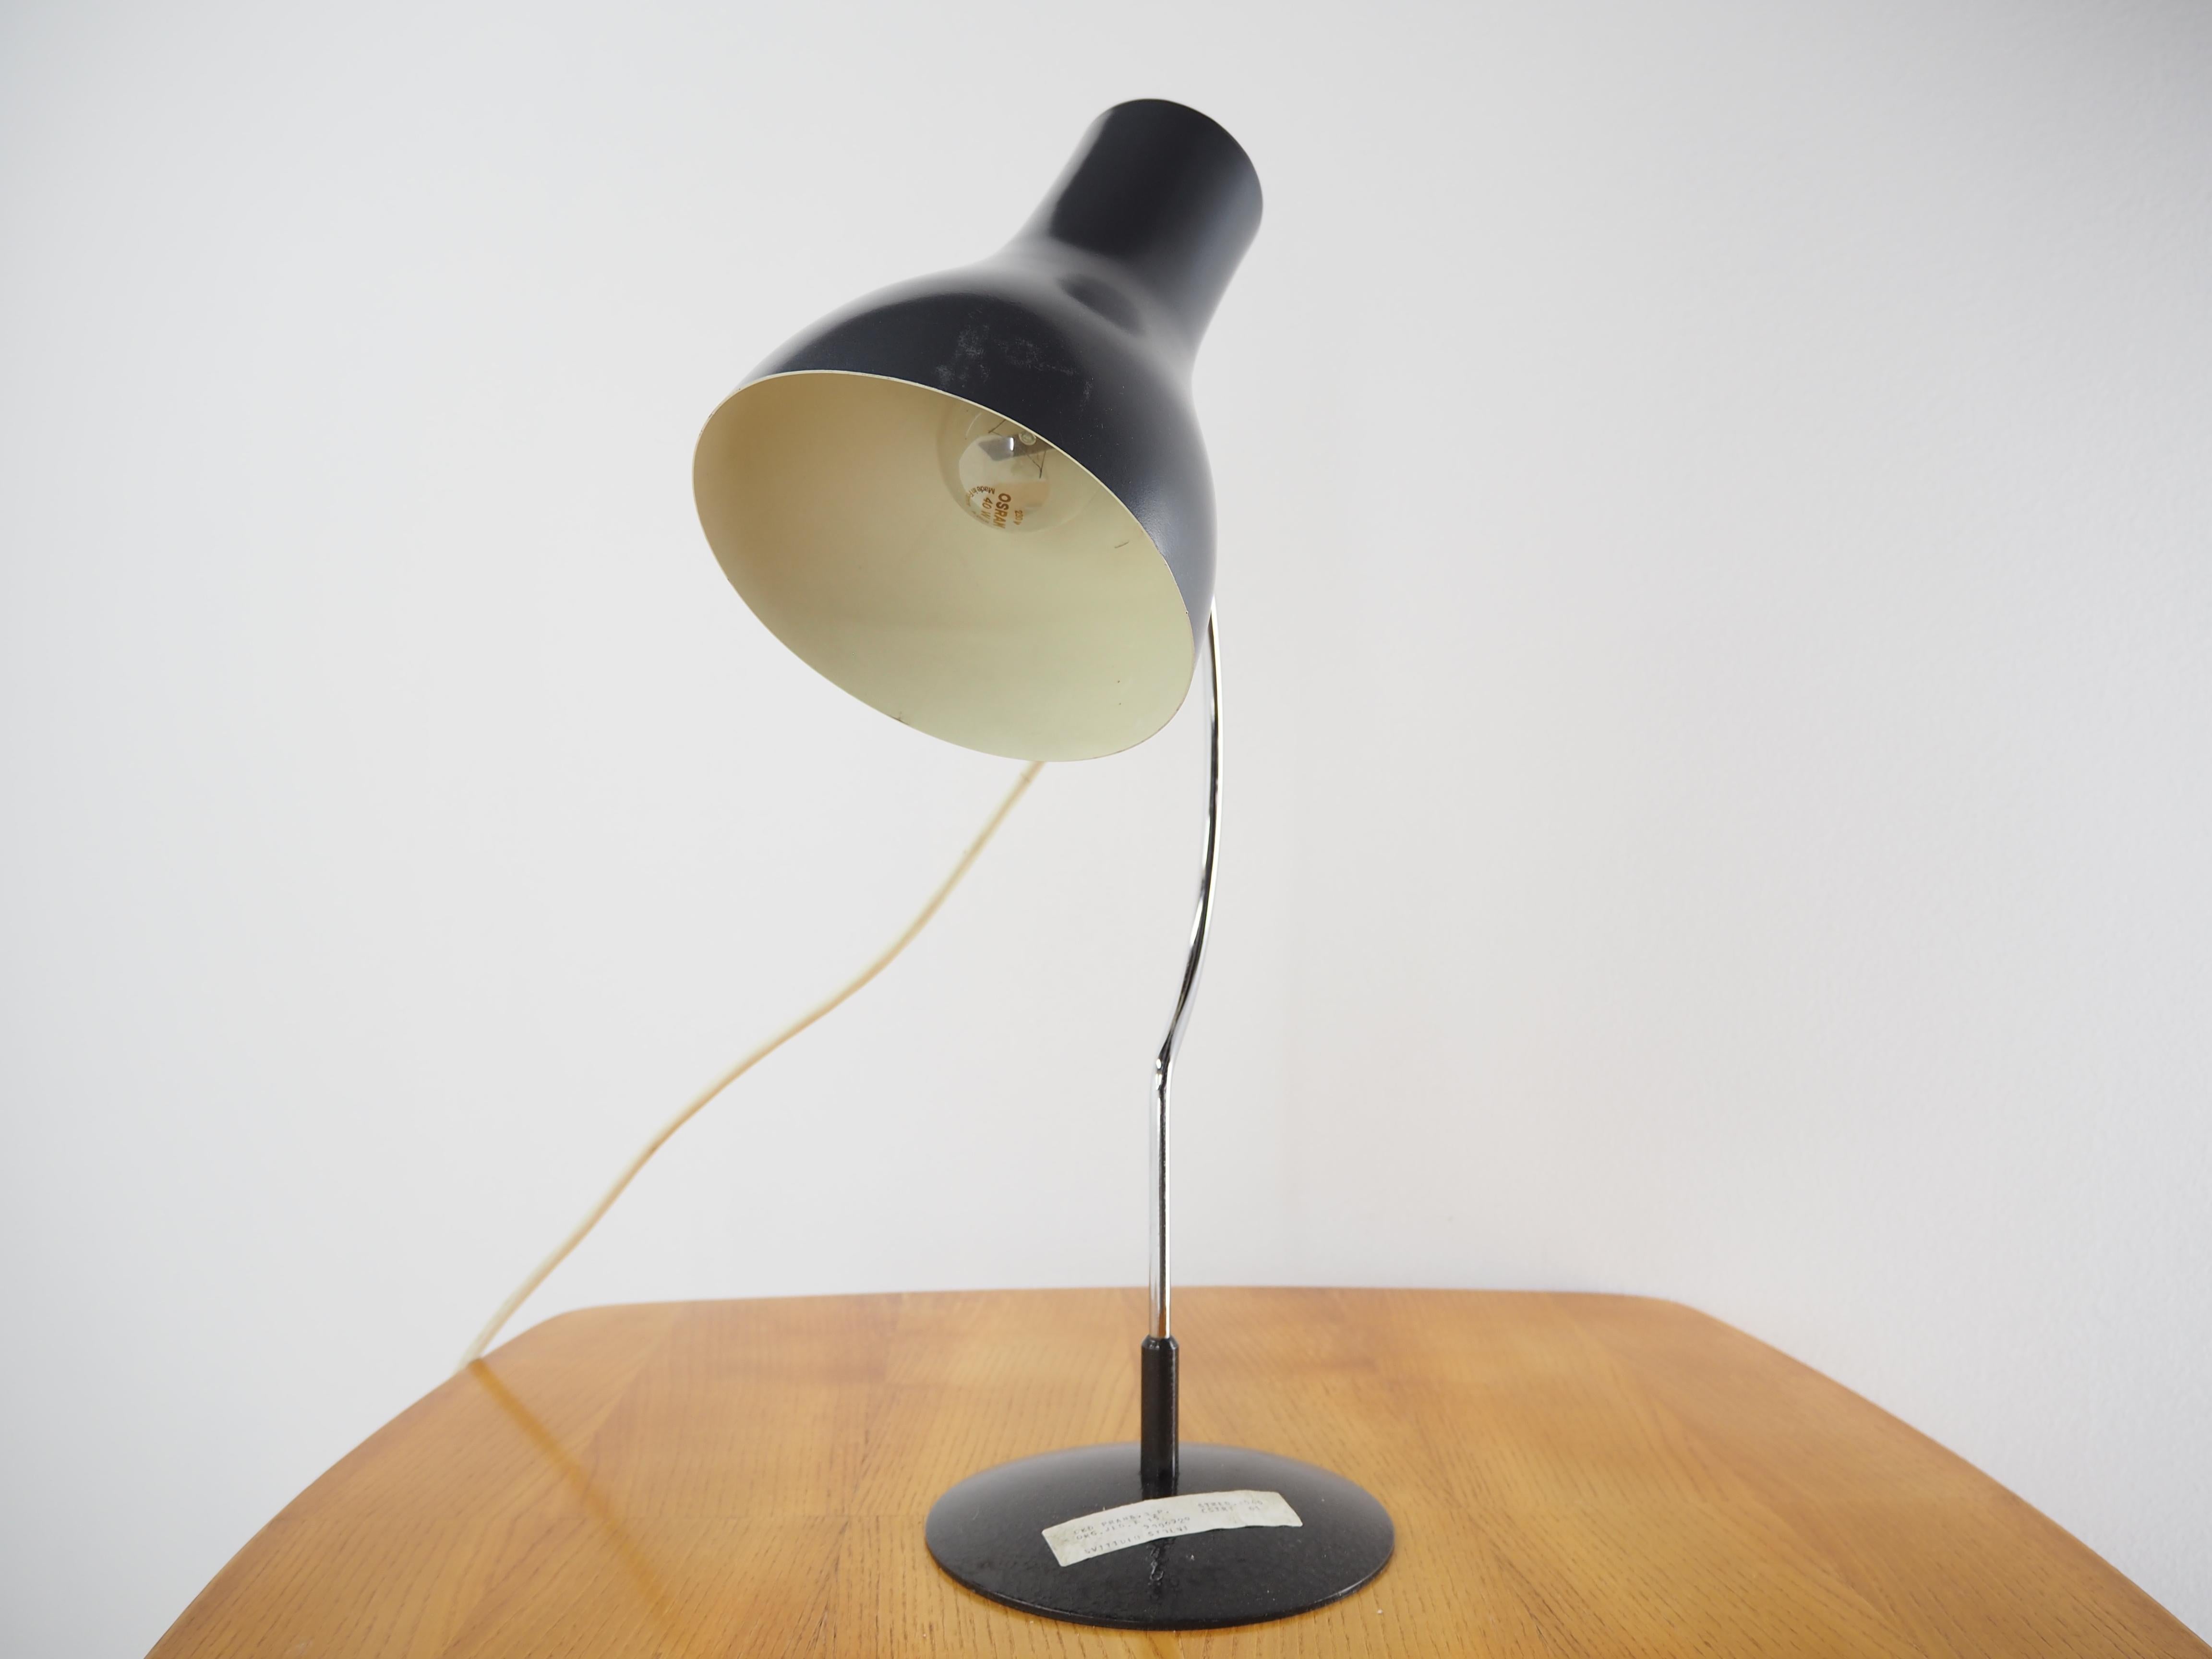 Czech Midcentury Table Lamp Designed by J. Hurka for Napako 1970s Type 0521